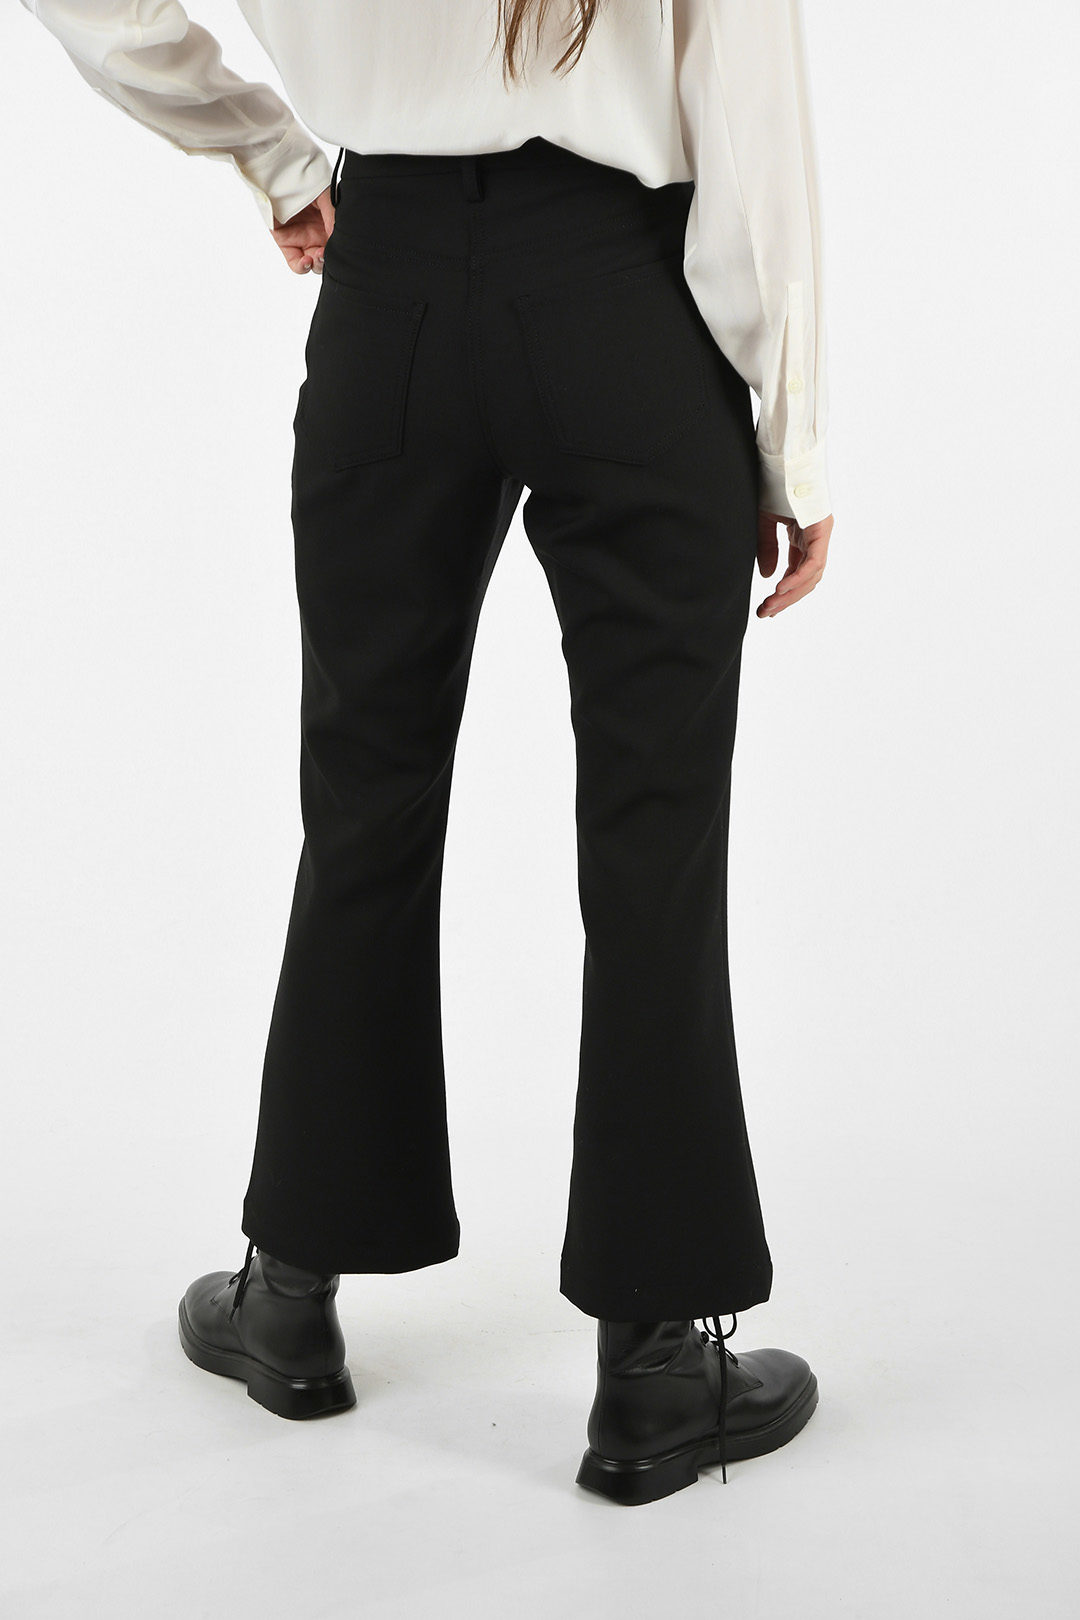 Off-White TAILORING 4 Pocket Flare Pants women - Glamood Outlet